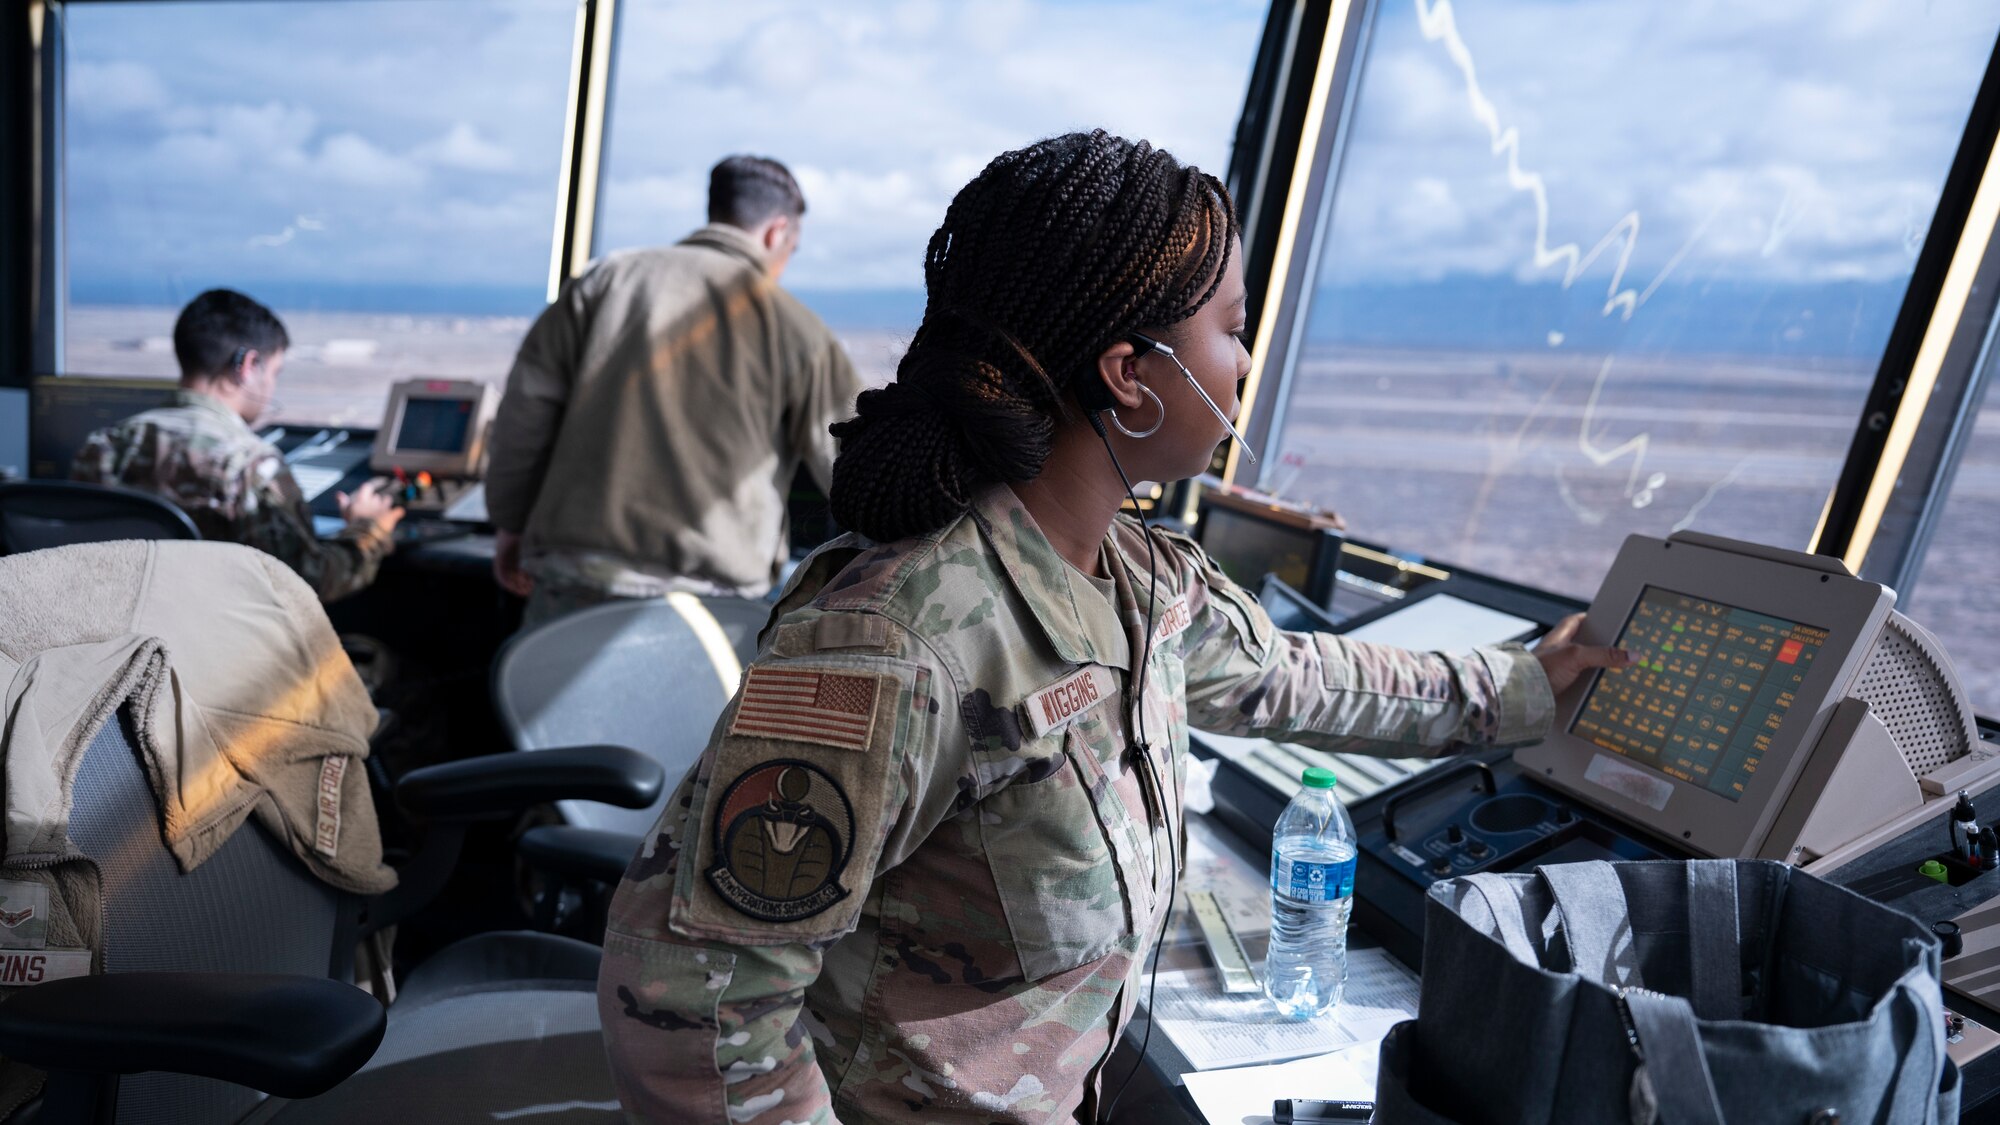 U.S. Air Force Airman 1st Class Indya Wiggins, 54th Operations Support Squadron air traffic controller monitors aircraft movement on the flightline at Holloman Air Force Base, New Mexico, Jan. 24, 2024. ATC’s transmit and listen to multiple frequencies at a time and are responsible for separating and directing aircraft movement during all flightline operations. (U.S. Air Force photo by Airman 1st Class Michelle Ferrari)